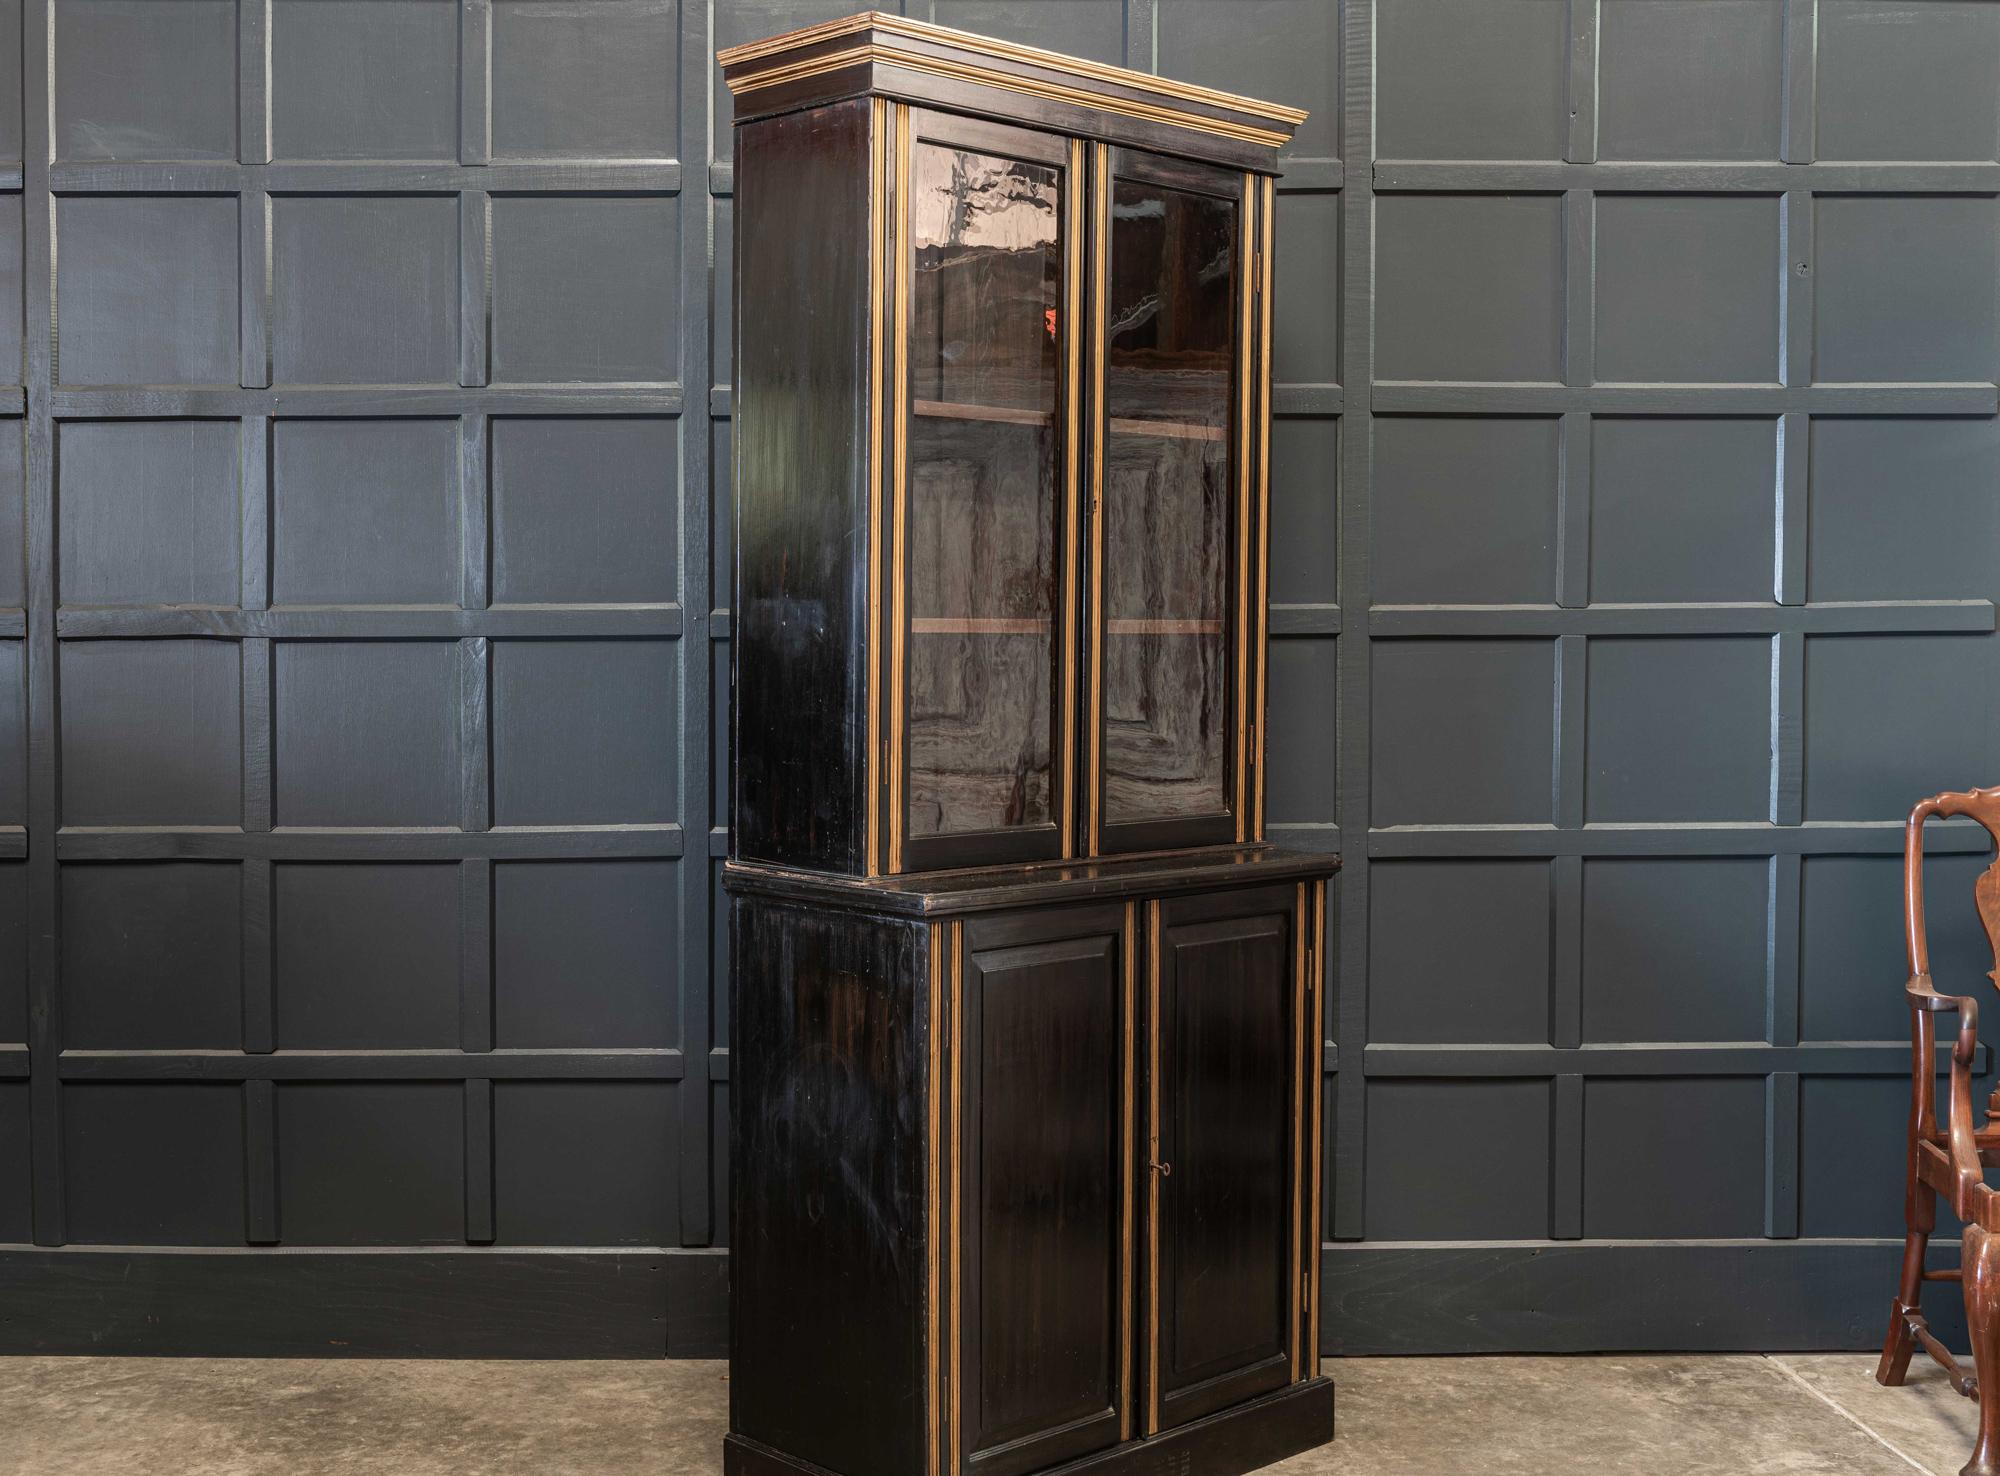 19th century English ebonized glazed bookcase with adjustable cabinet shelving. Original glass, locking key and brass locks. Three sections, great slim proportions,

circa 1850.

Measures: H 220 x W 100.5 x D 45.5cm
Cabinet D 31cm.

     